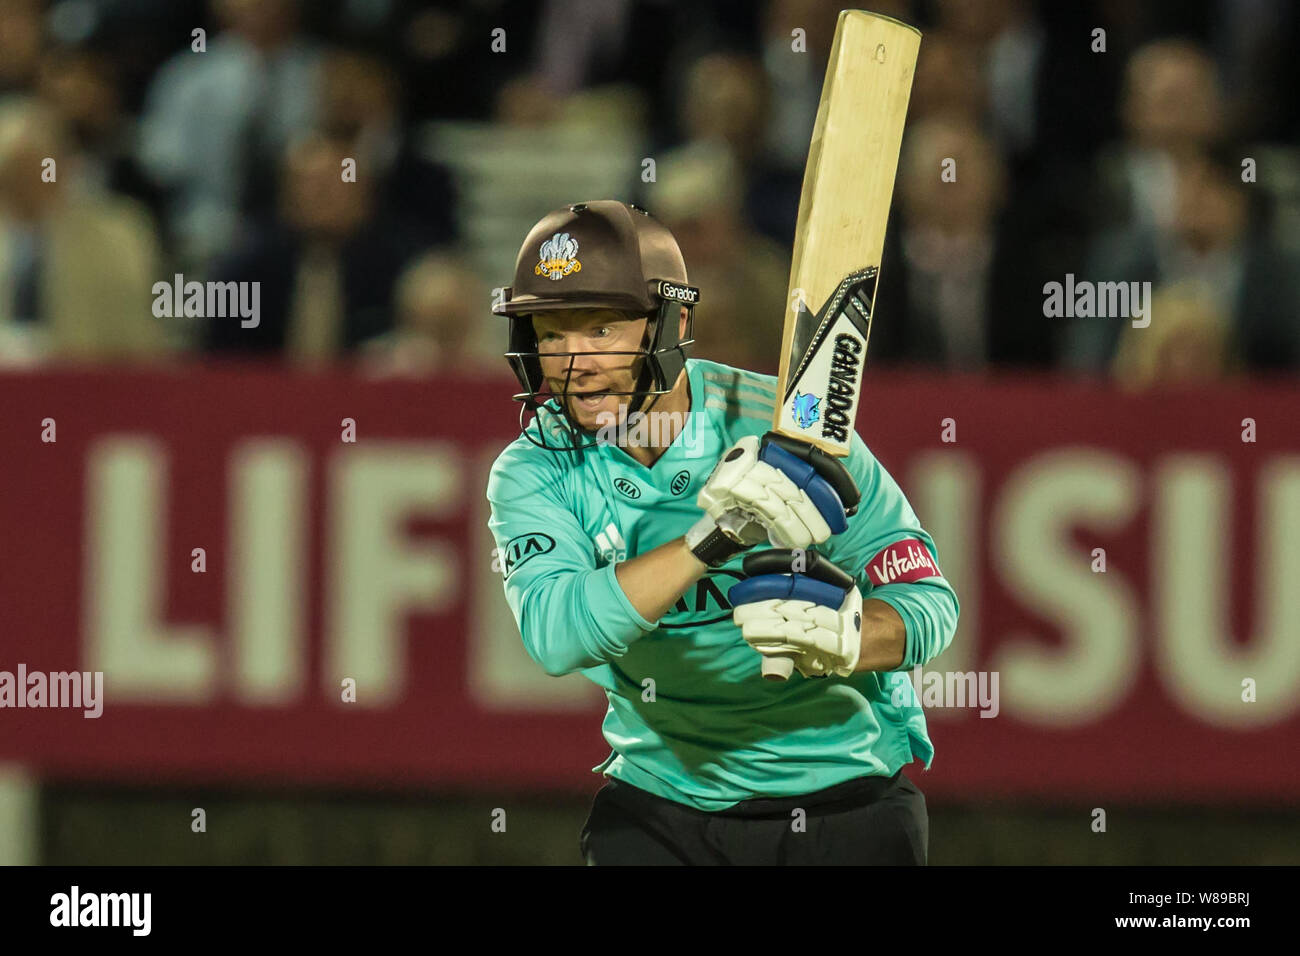 London, UK. 8 August, 2019. Gareth Batty batting for Surrey against Middlesex in the Vitality Blast T20 cricket match at Lords. David Rowe/Alamy Live News Stock Photo